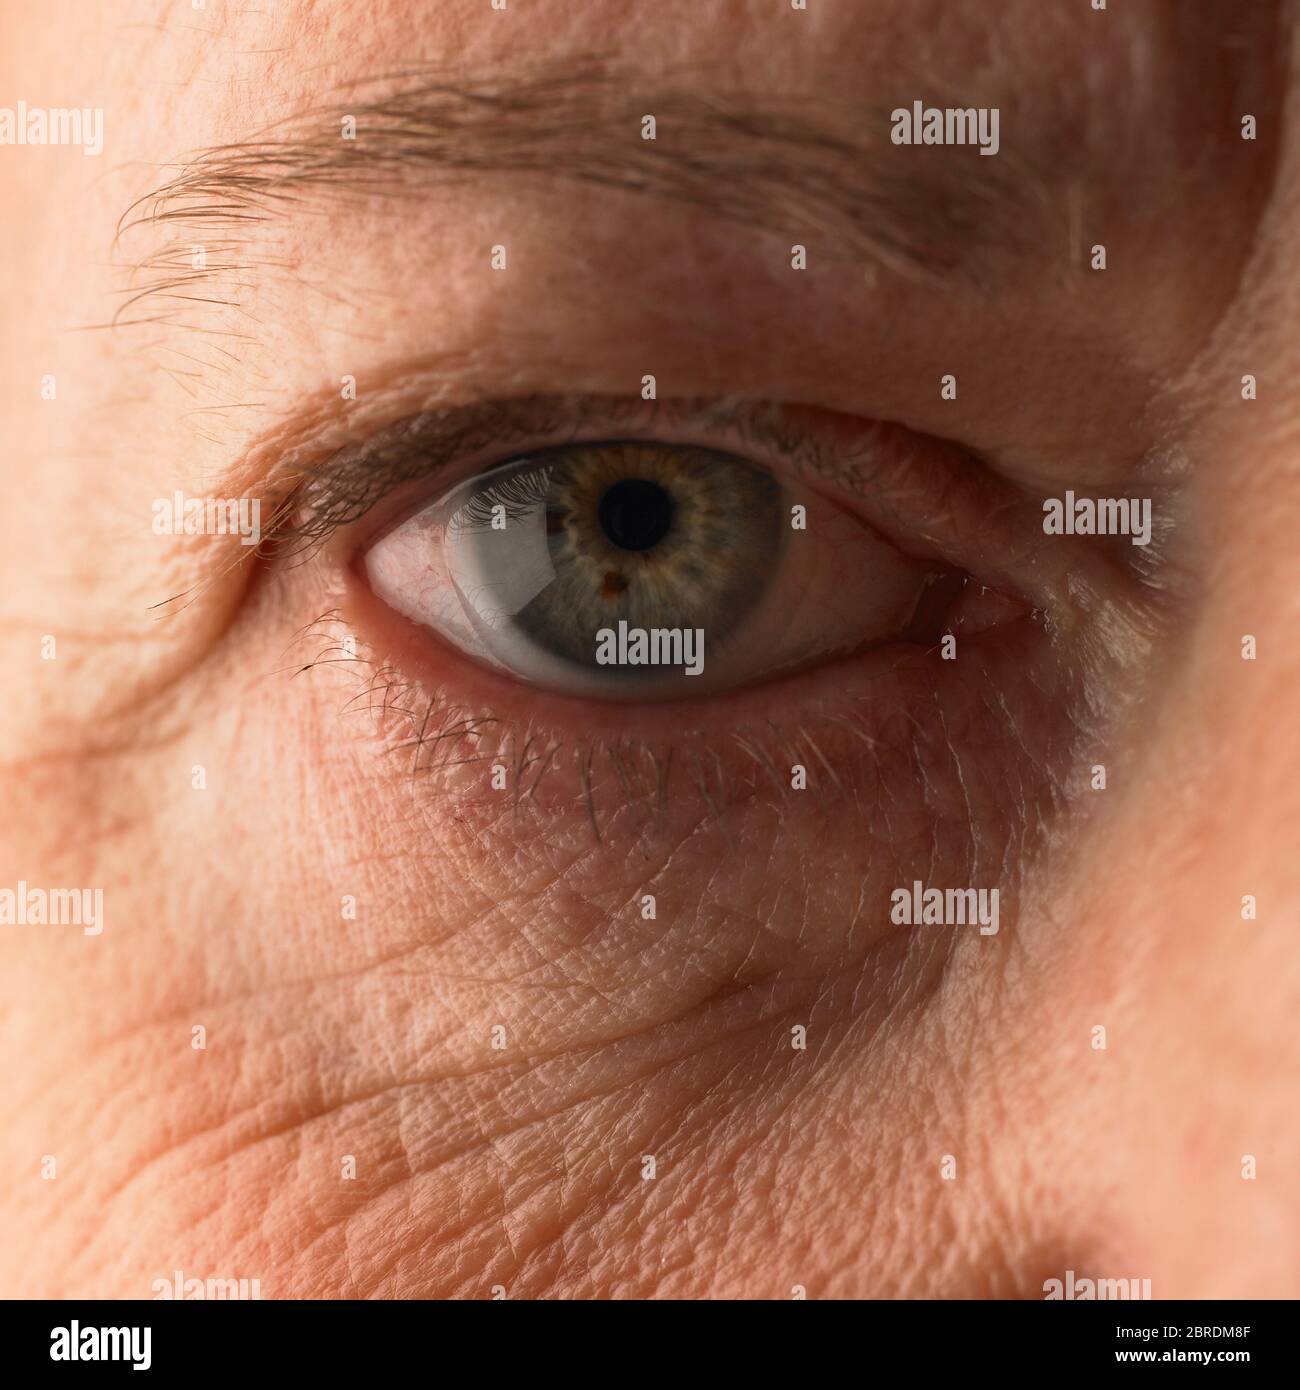 Closeup of older womans eye wearing contact lens Stock Photo